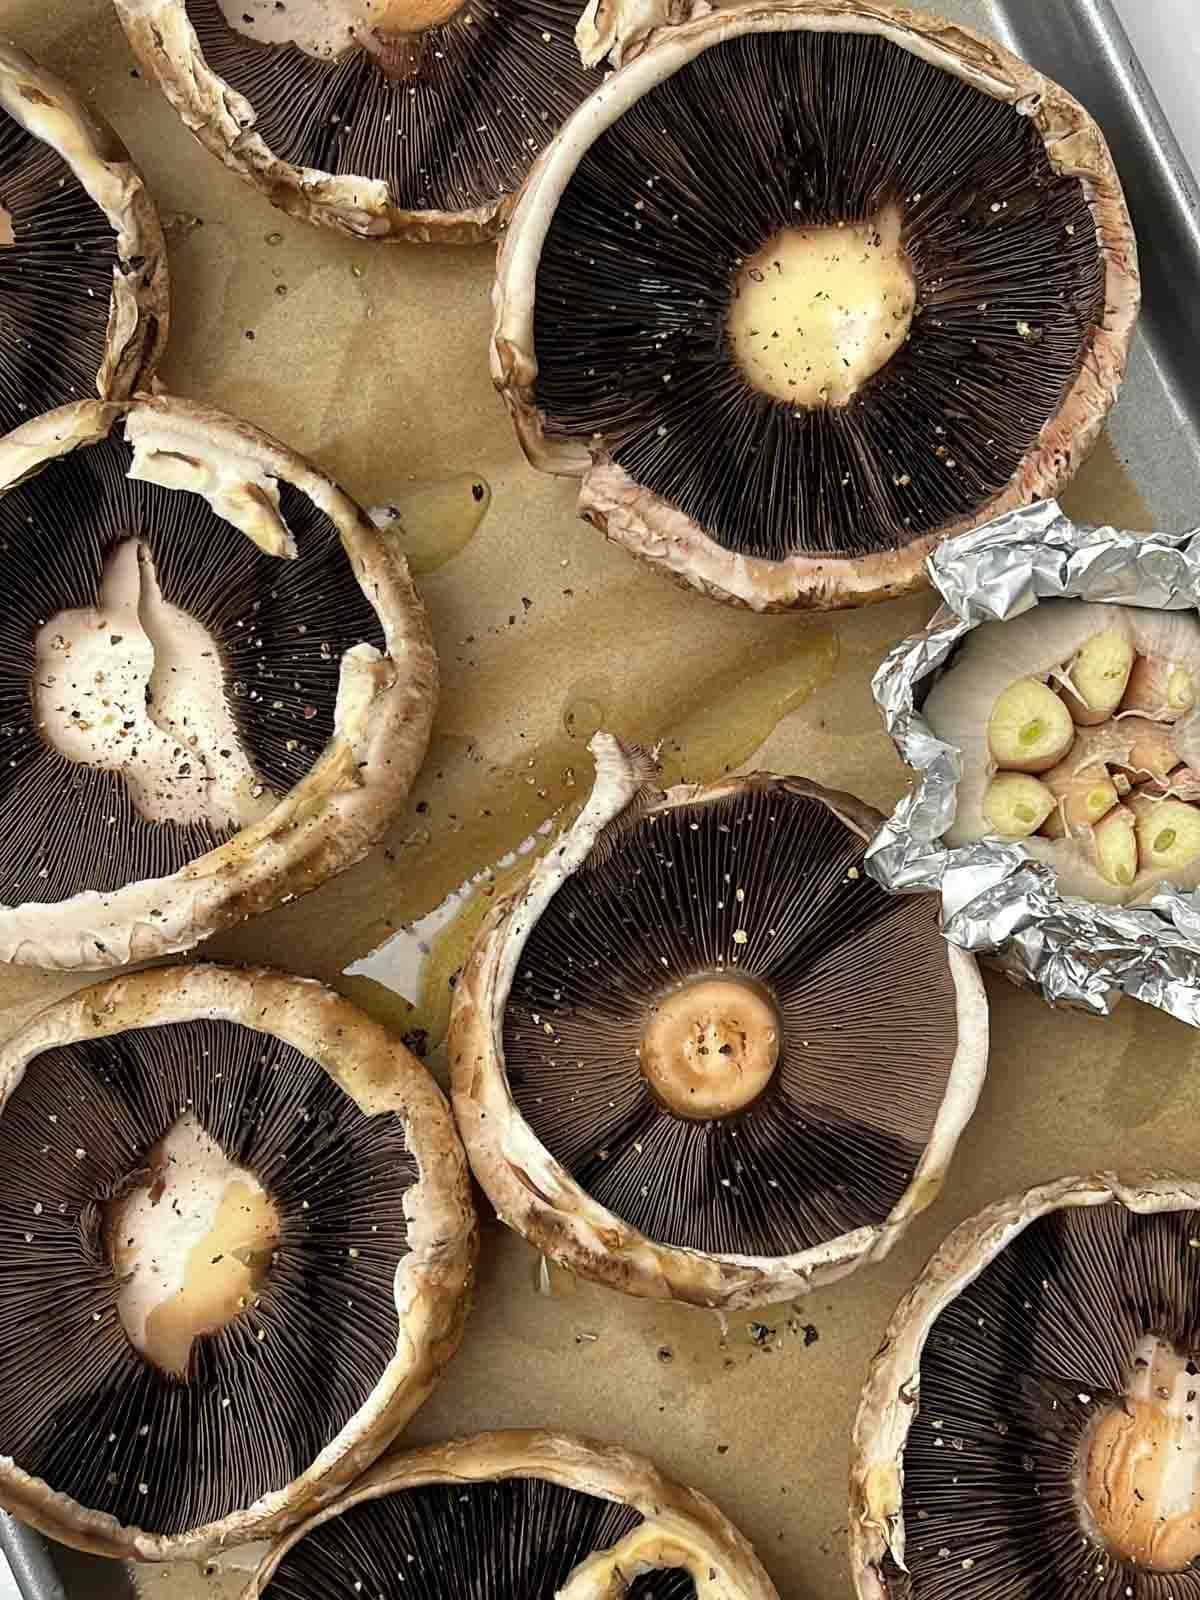 Portobello mushrooms and a garlic bulb drizzled with oil on a baking tray, ready to make mushroom wellingtons.